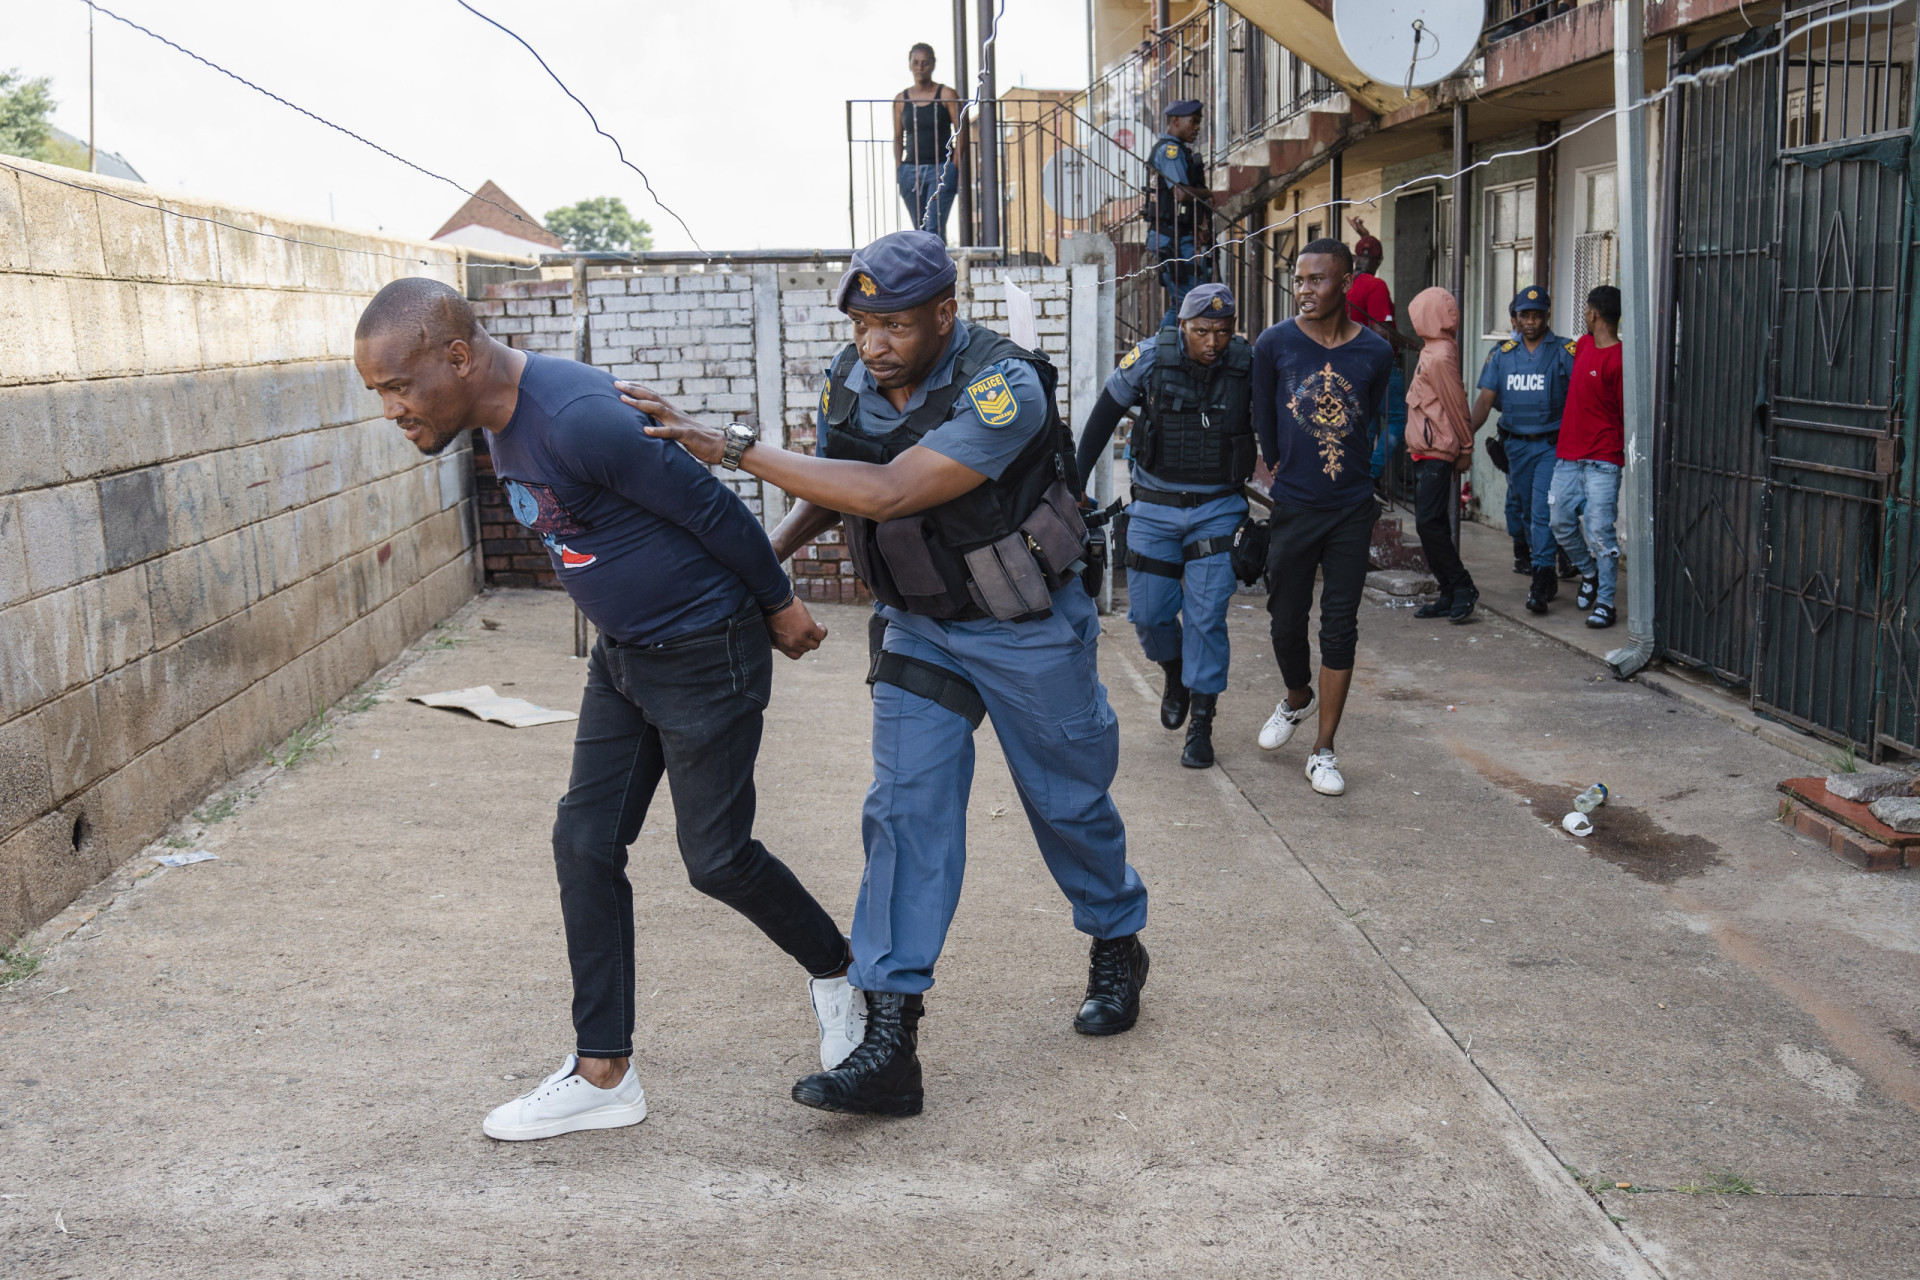 <p>Johannesburg once attracted visitors from all over the world. Now, with a Crime Index score of 80.7, its own residents are leaving in droves.</p><p><a href="https://www.msn.com/en-us/community/channel/vid-7xx8mnucu55yw63we9va2gwr7uihbxwc68fxqp25x6tg4ftibpra?cvid=94631541bc0f4f89bfd59158d696ad7e">Follow us and access great exclusive content every day</a></p>